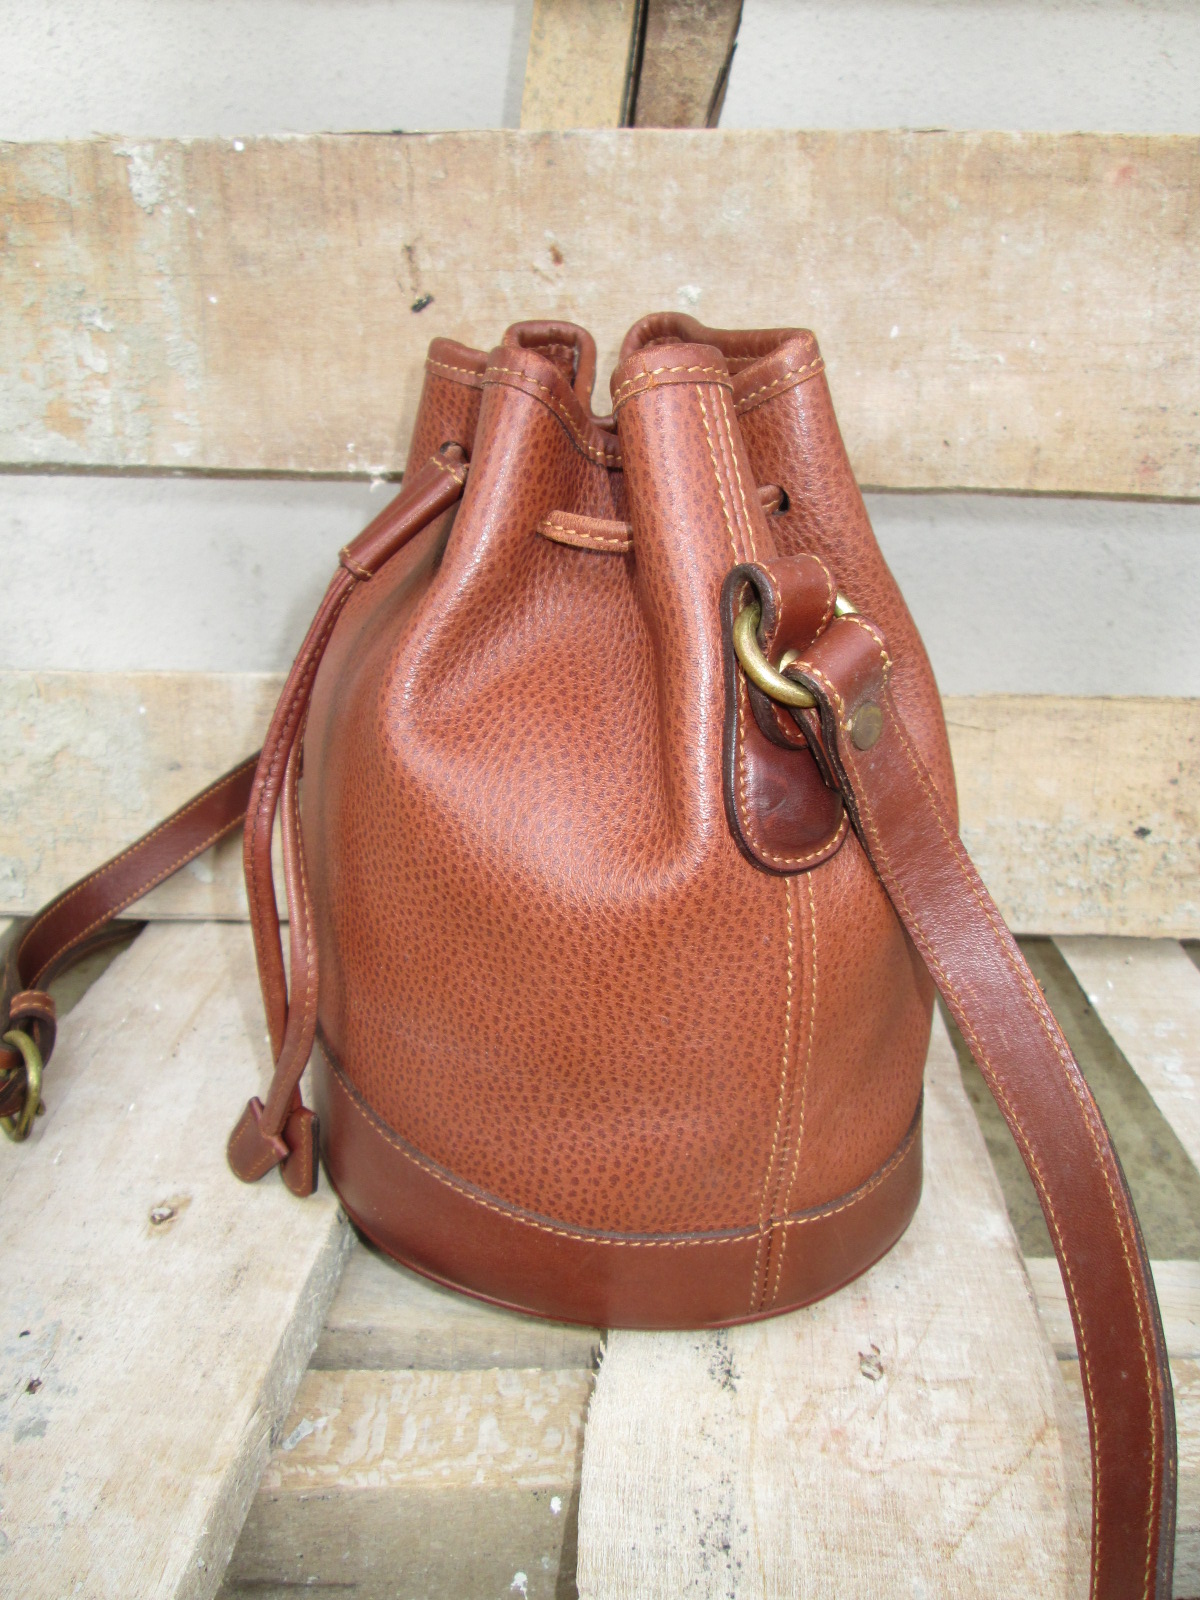 d0rayakEEbaG: Authentic Vtg Coach Brown Leather Bucket Shoulder Bag(SOLD)